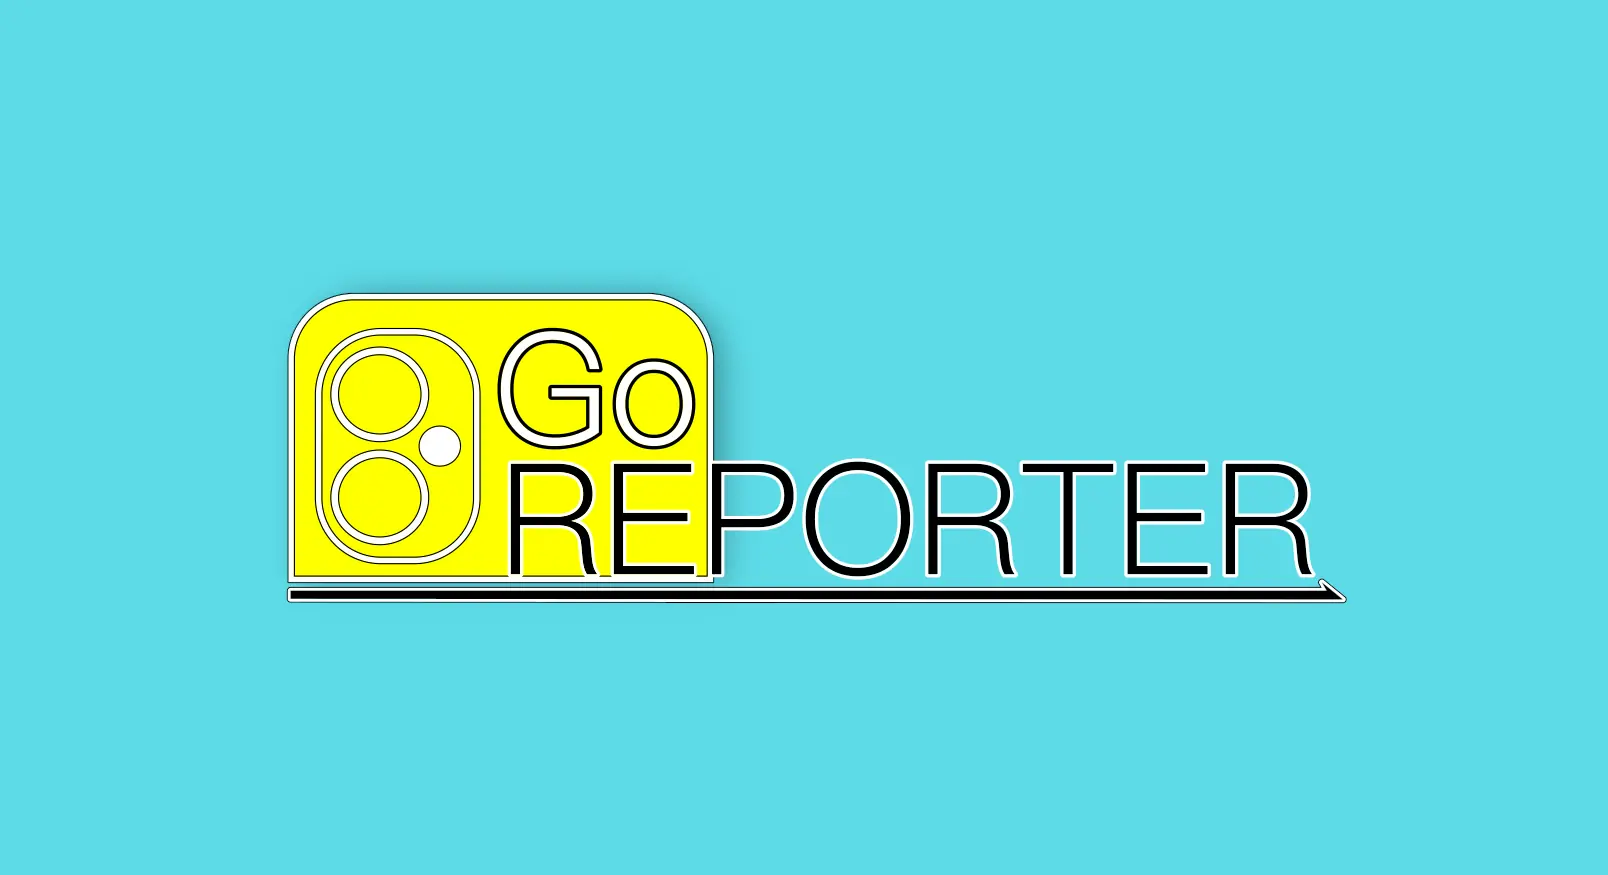 GoReporter is born: give your contribution to the news!